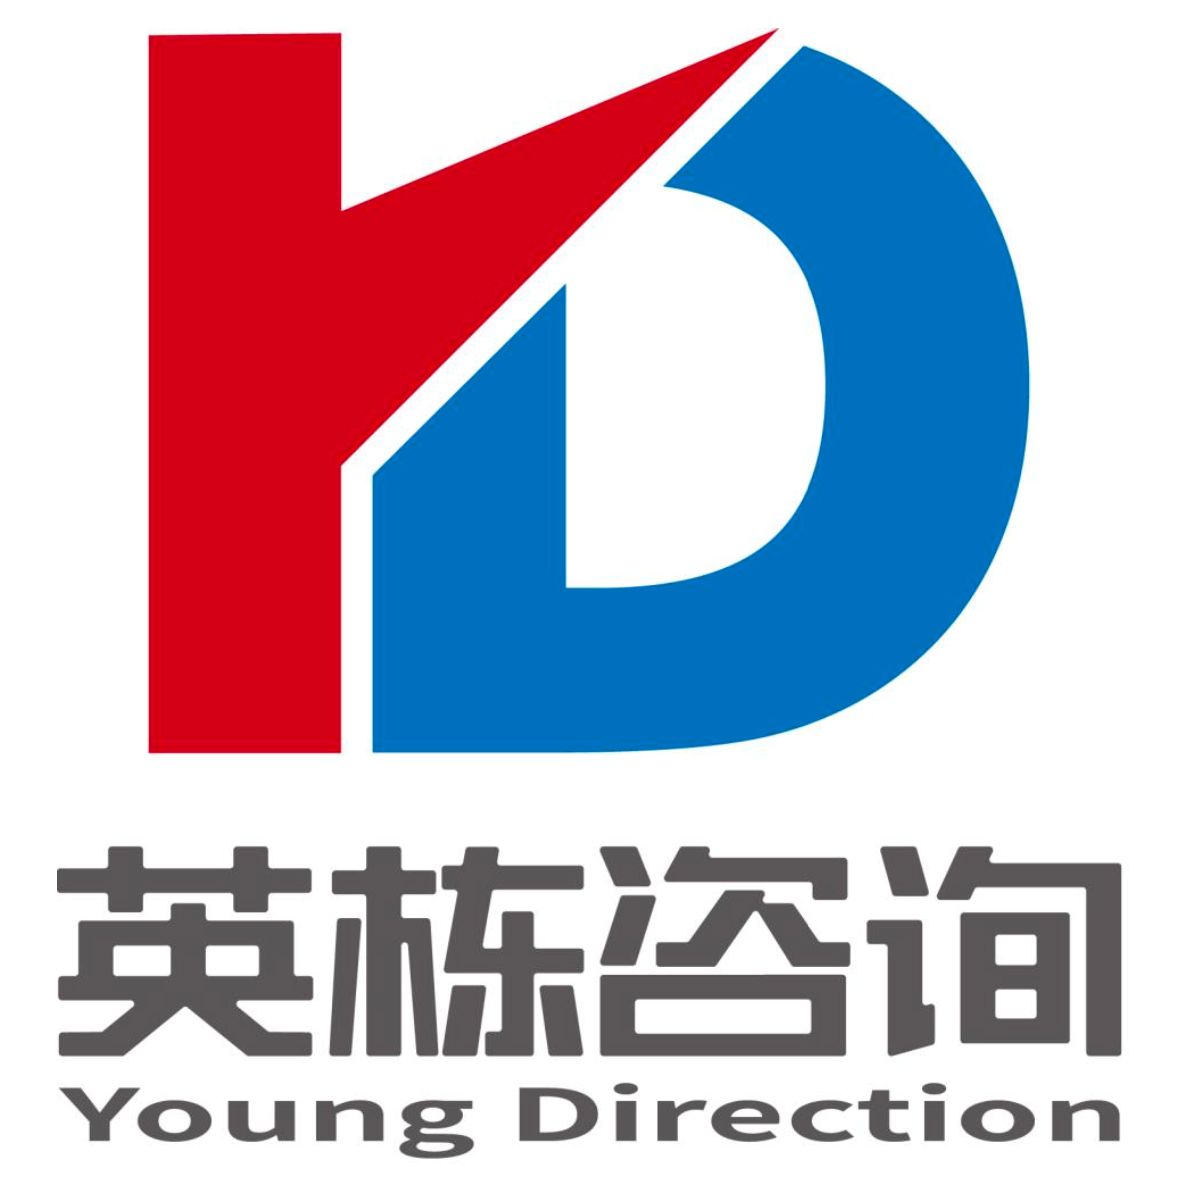 Young Direction logo